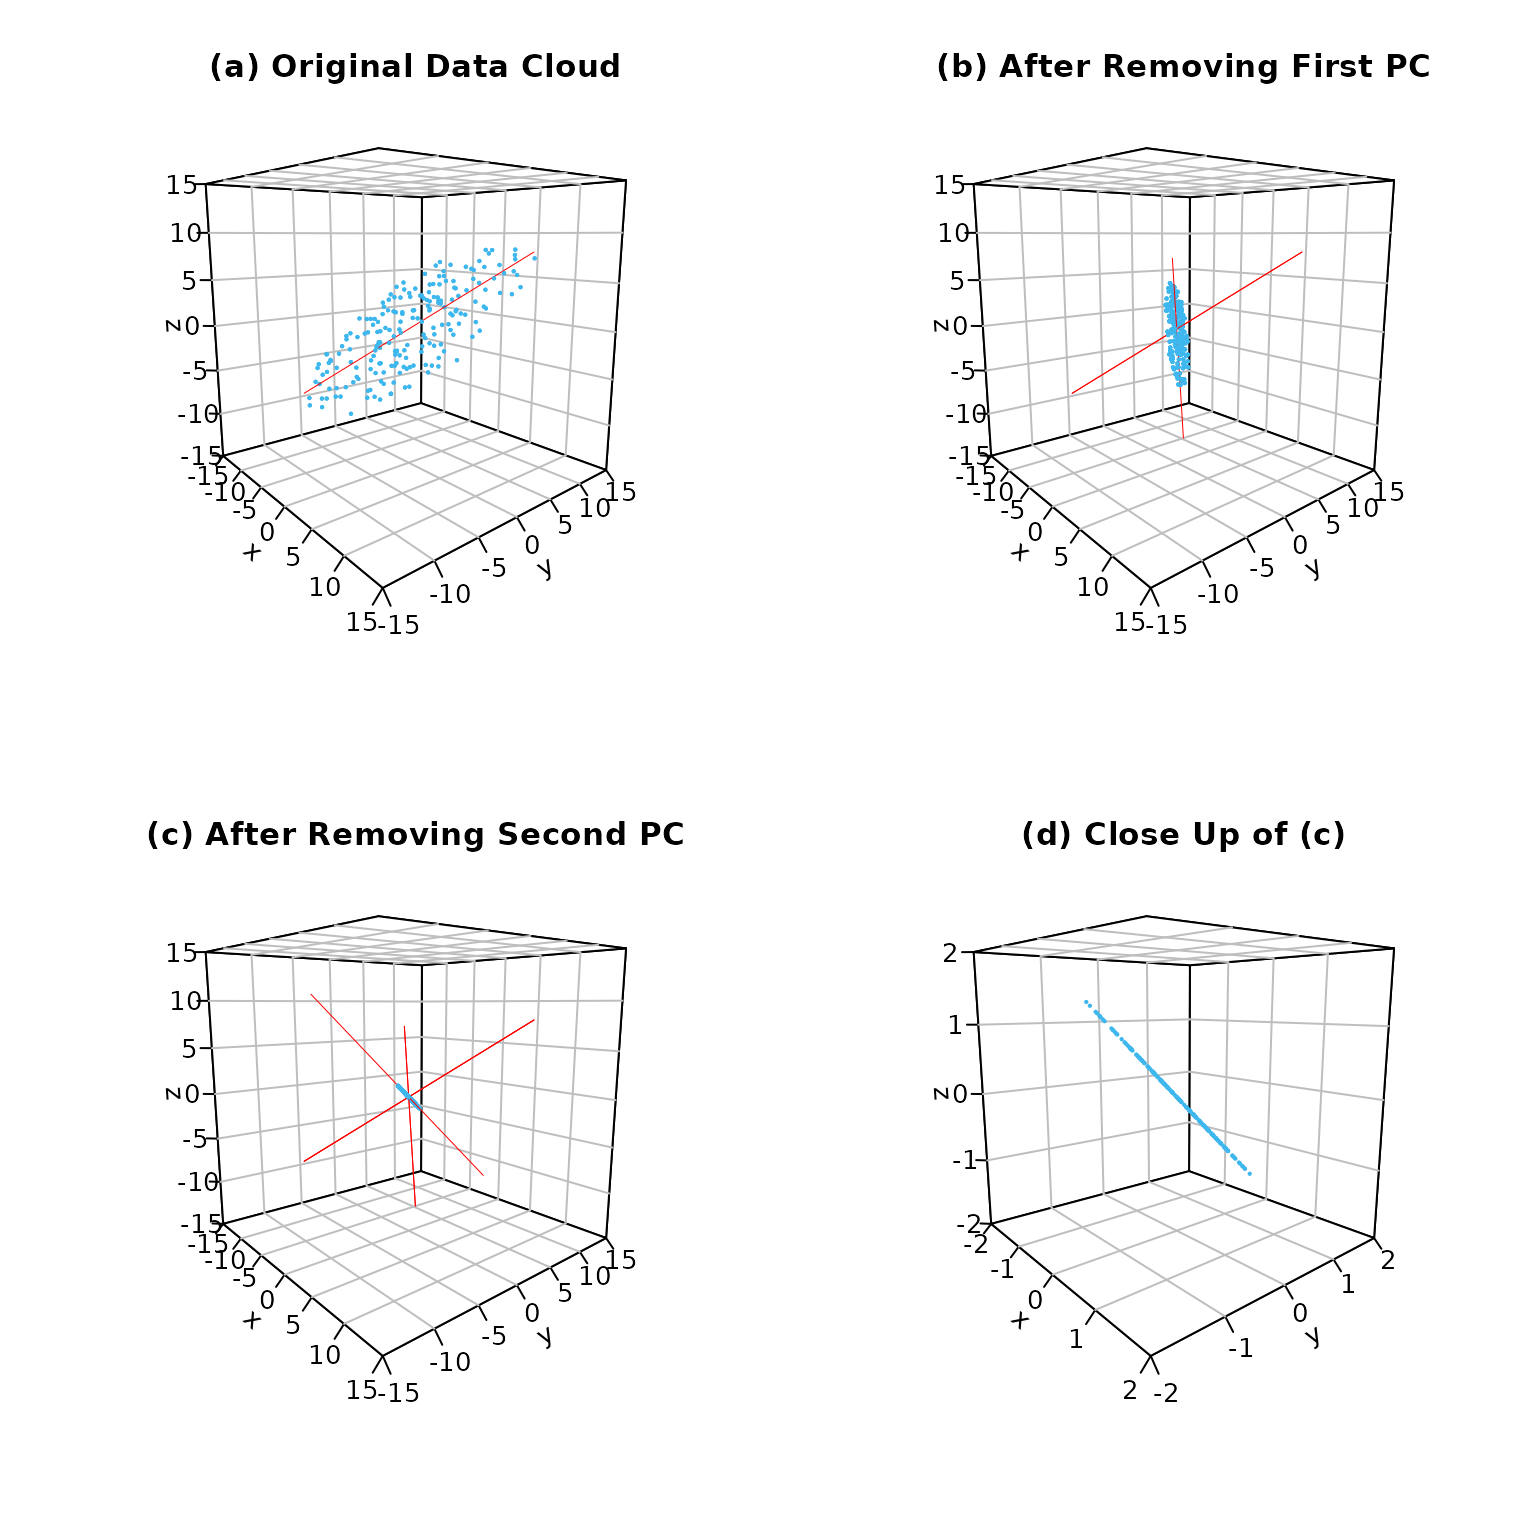 Figure 6. How the data (in light blue ) changes during PCA: (a) the original data in three dimensions; (b) the data after reducing to two dimensions; (c) the data after reducing to one dimension; (d) close up of (c) making it easier to see the individual data points. The brown lines are the principal component axes at each step in the PCA analysis.